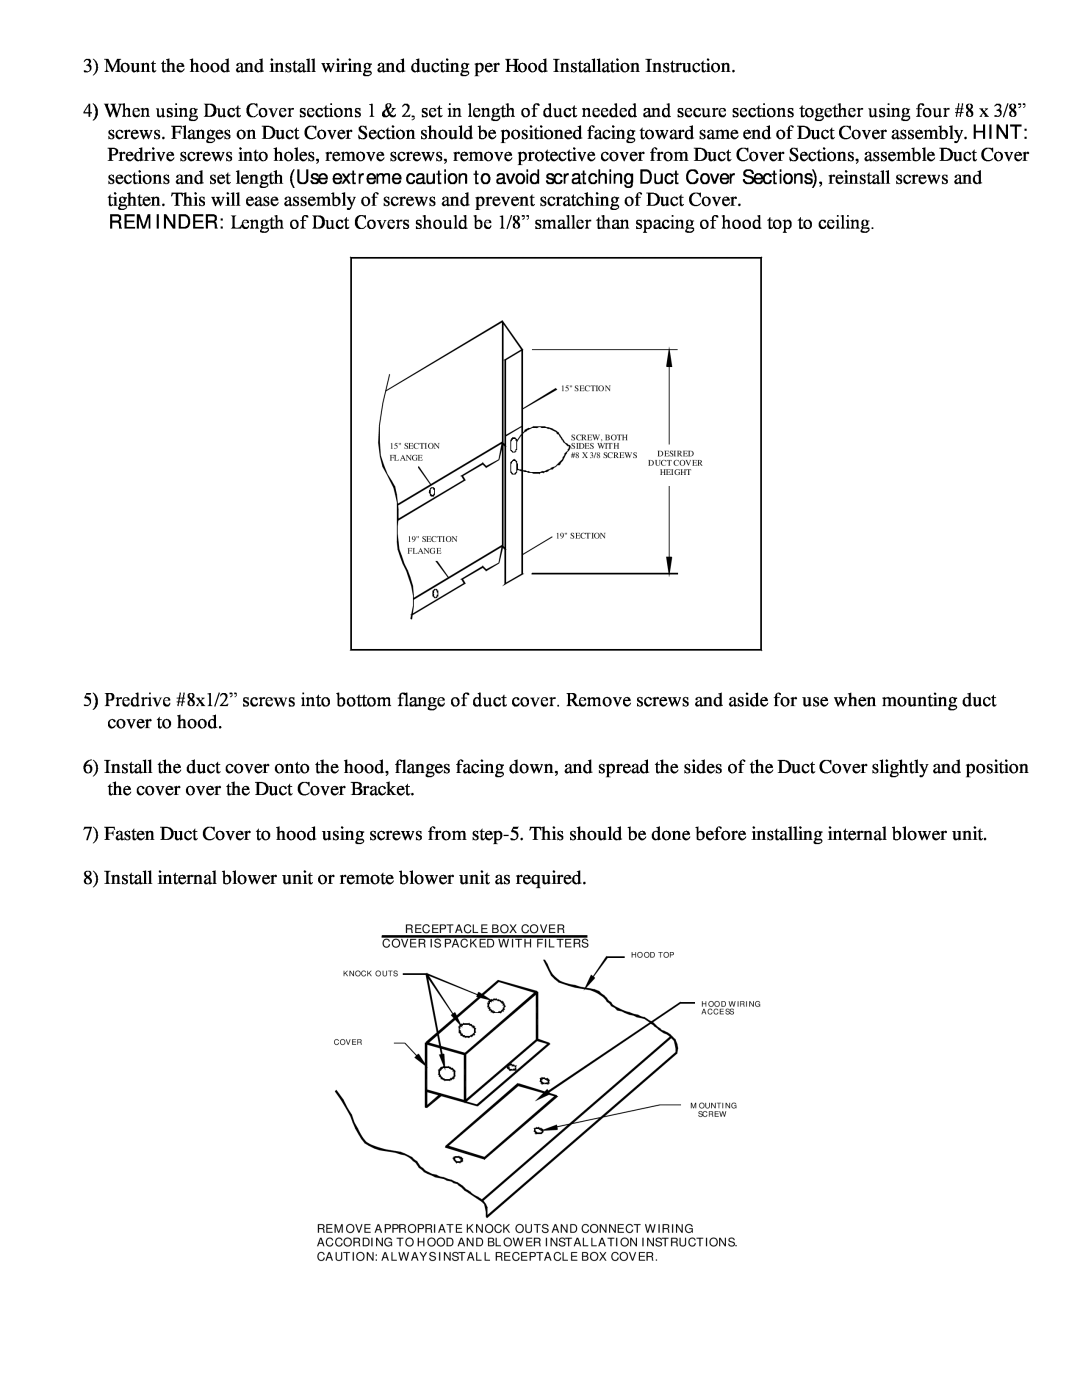 Wind Crest WPN installation instructions Install internal blower unit or remote blower unit as required 